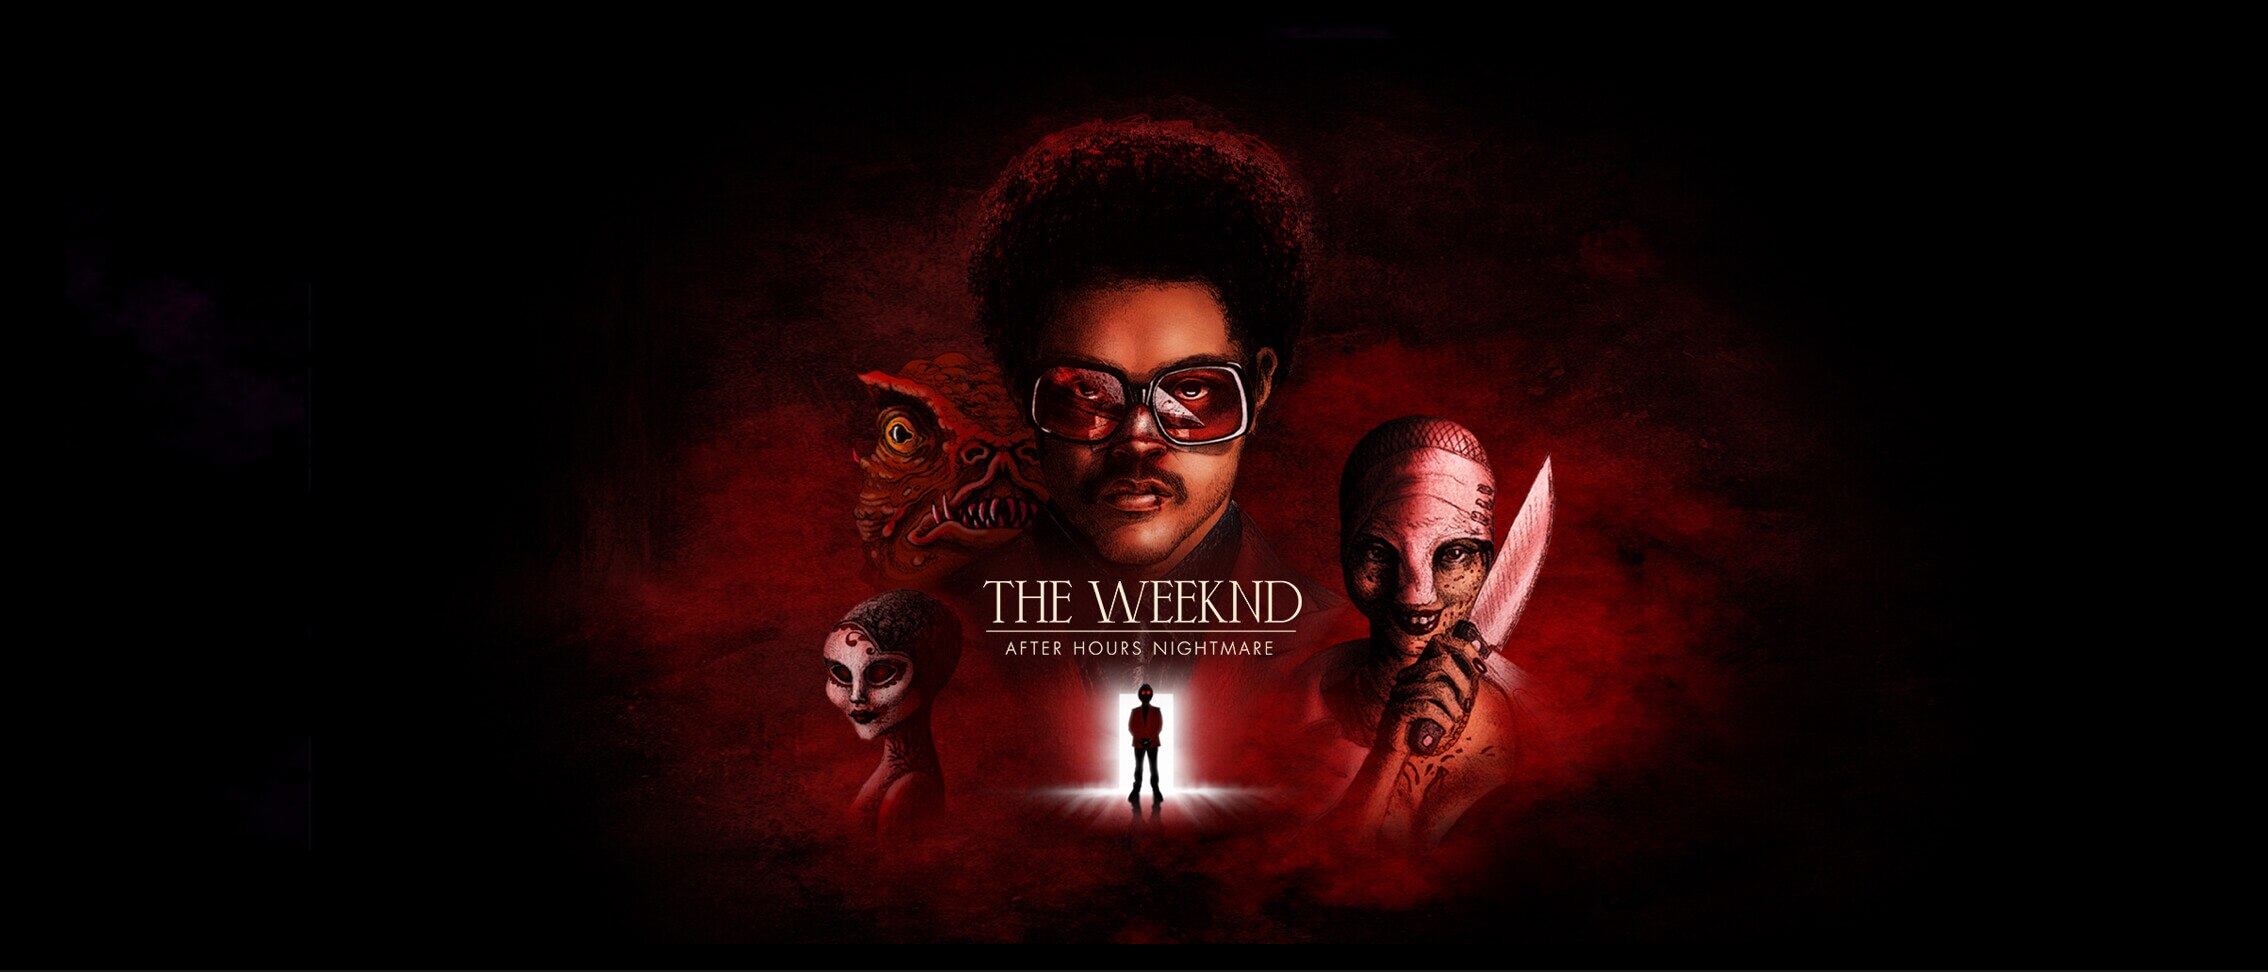 The Weeknd: After Hours Nightmare coming to Halloween Horror Nights 2022